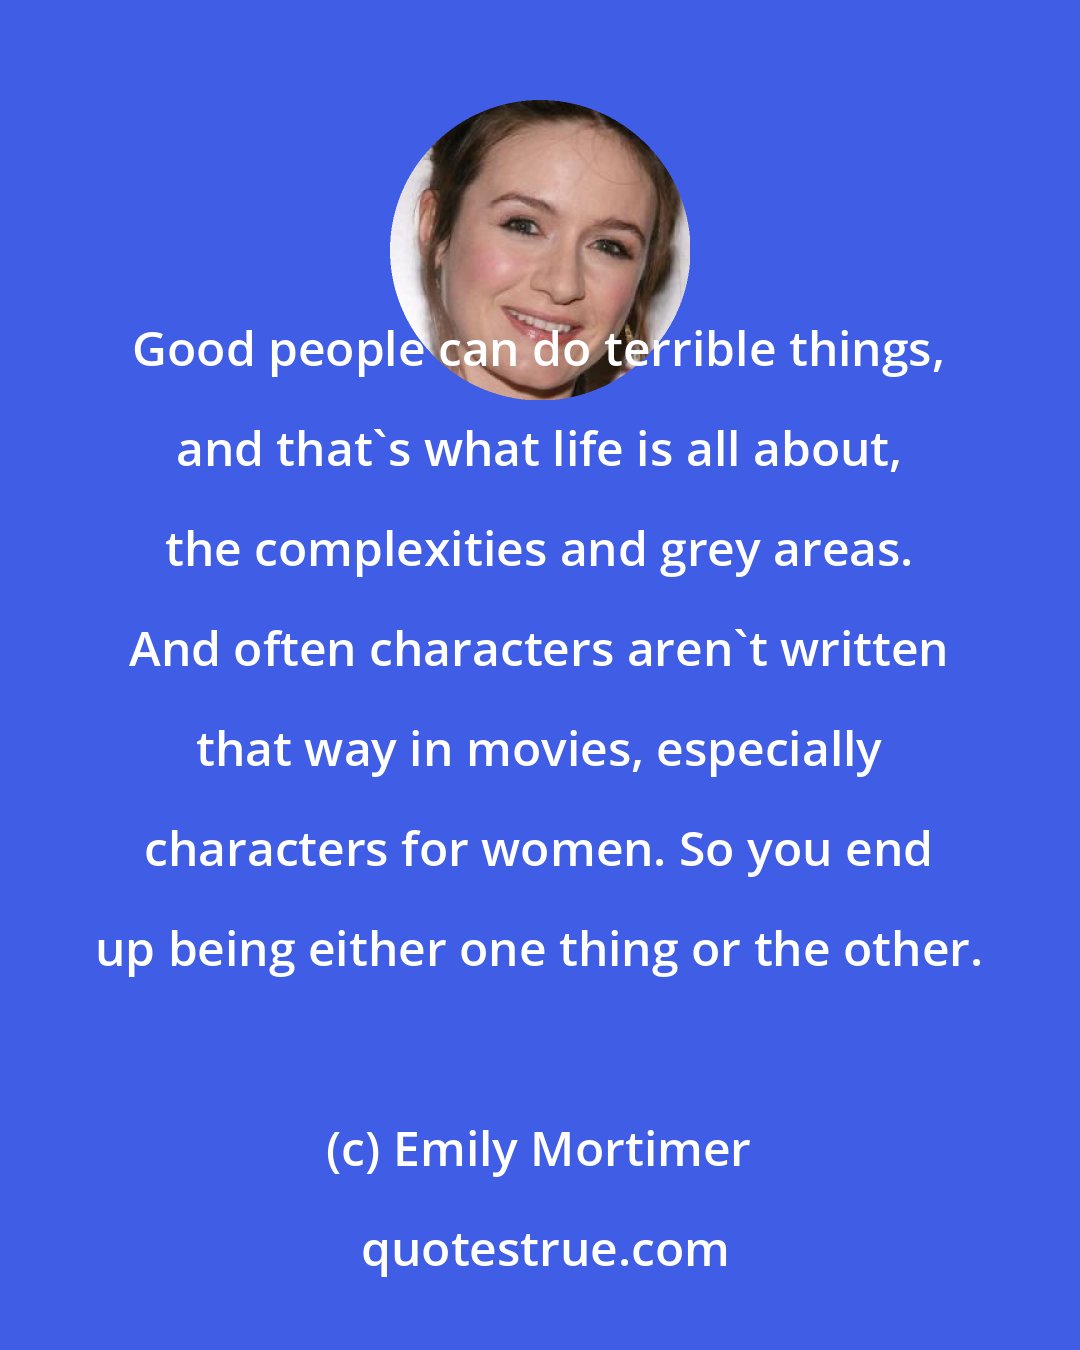 Emily Mortimer: Good people can do terrible things, and that's what life is all about, the complexities and grey areas. And often characters aren't written that way in movies, especially characters for women. So you end up being either one thing or the other.